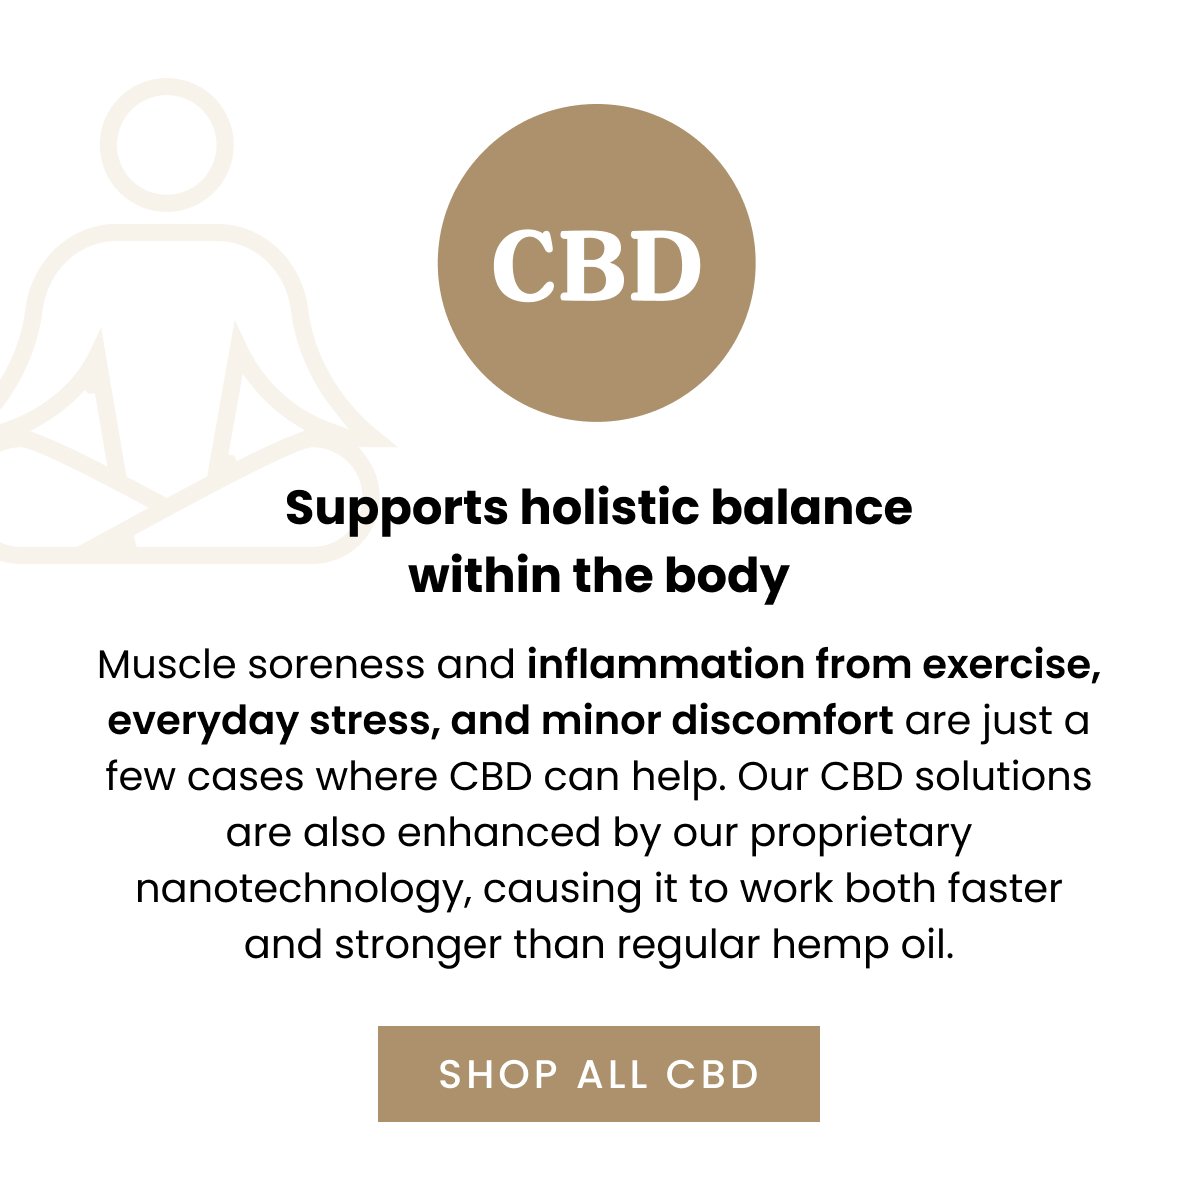 CBD: Supports holistic balance within the body.